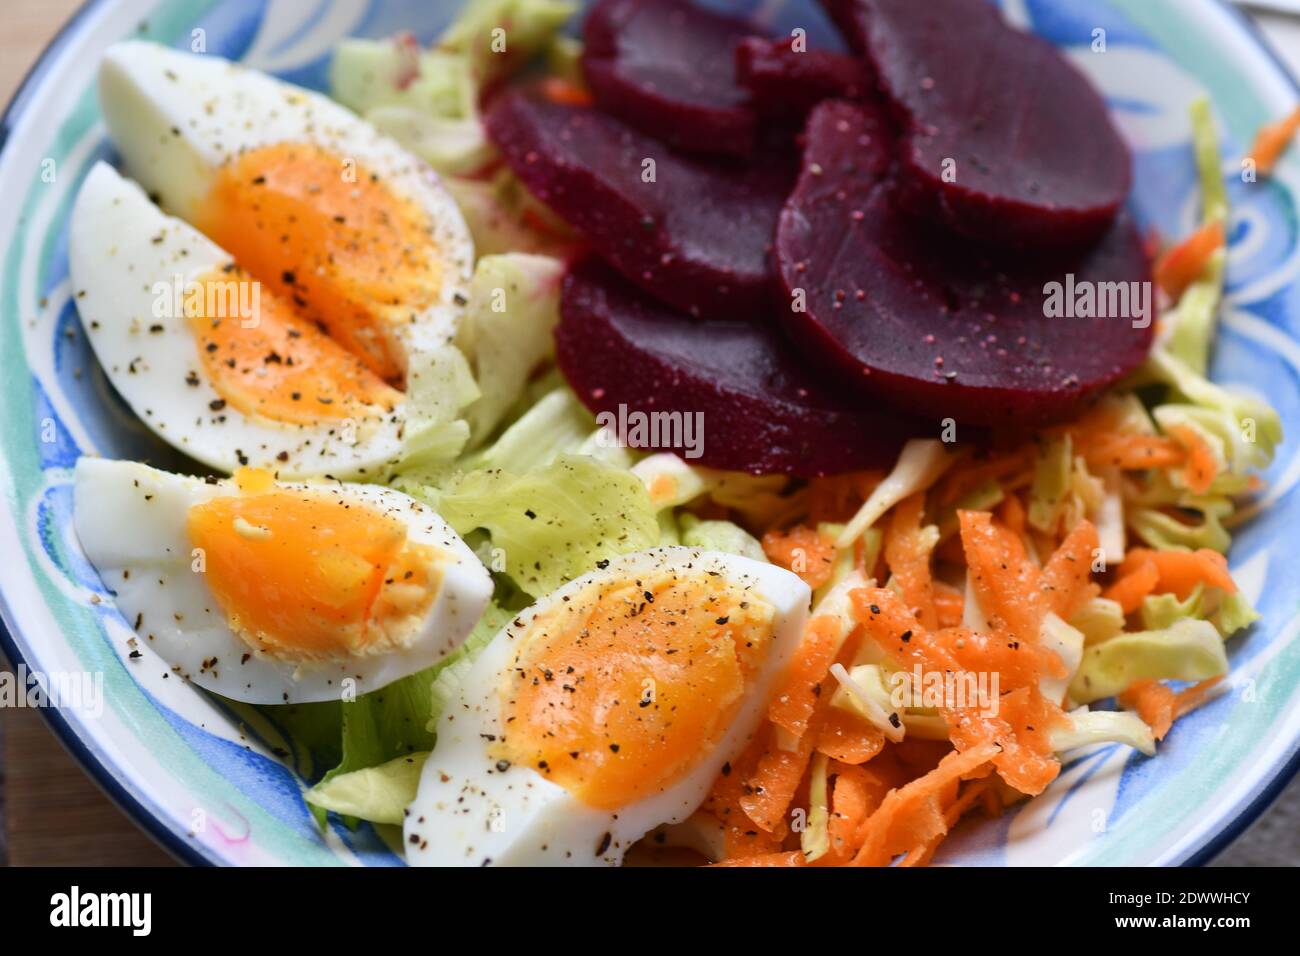 A colourful light lunch, of boiled egg, coleslaw, lettuce and beetroot. Stock Photo